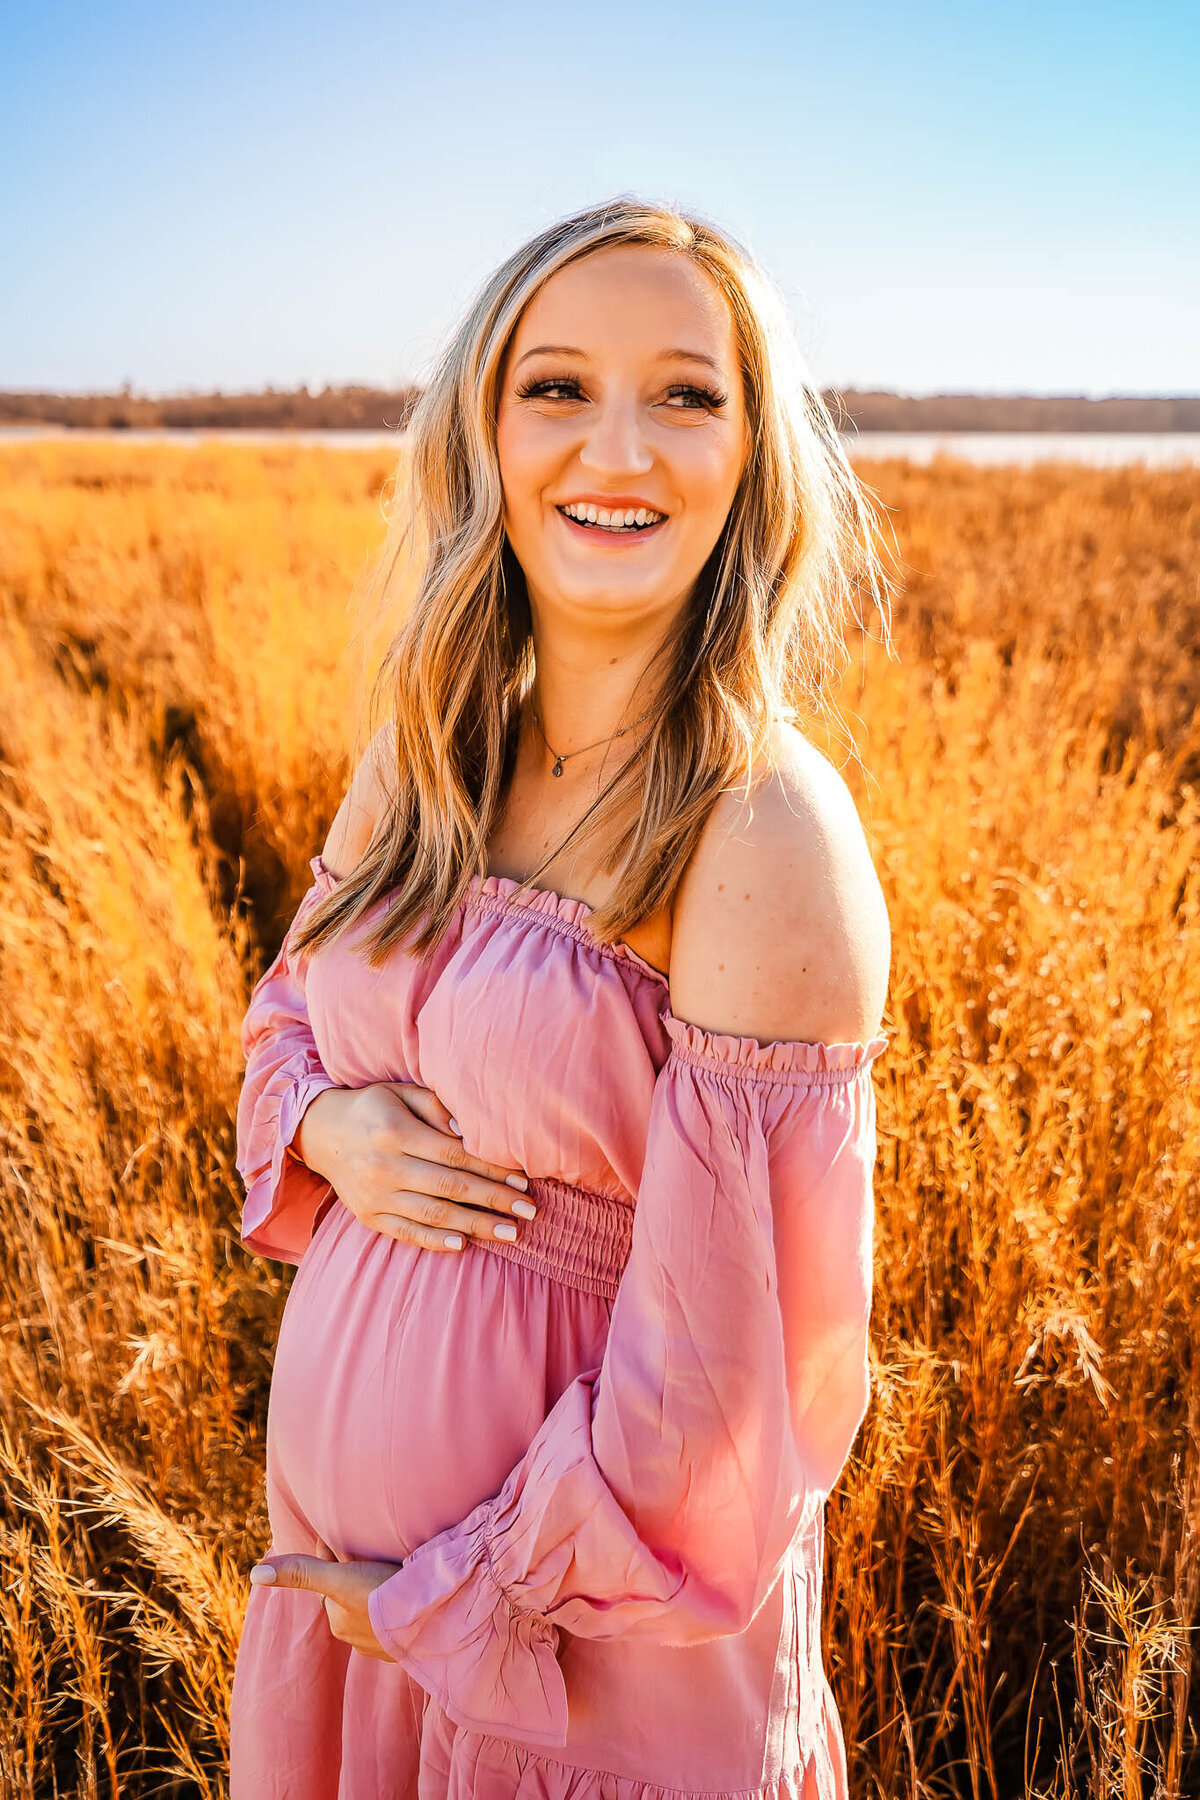 Laughing pregnant mother in a pink dress in a grassy field during golden hour